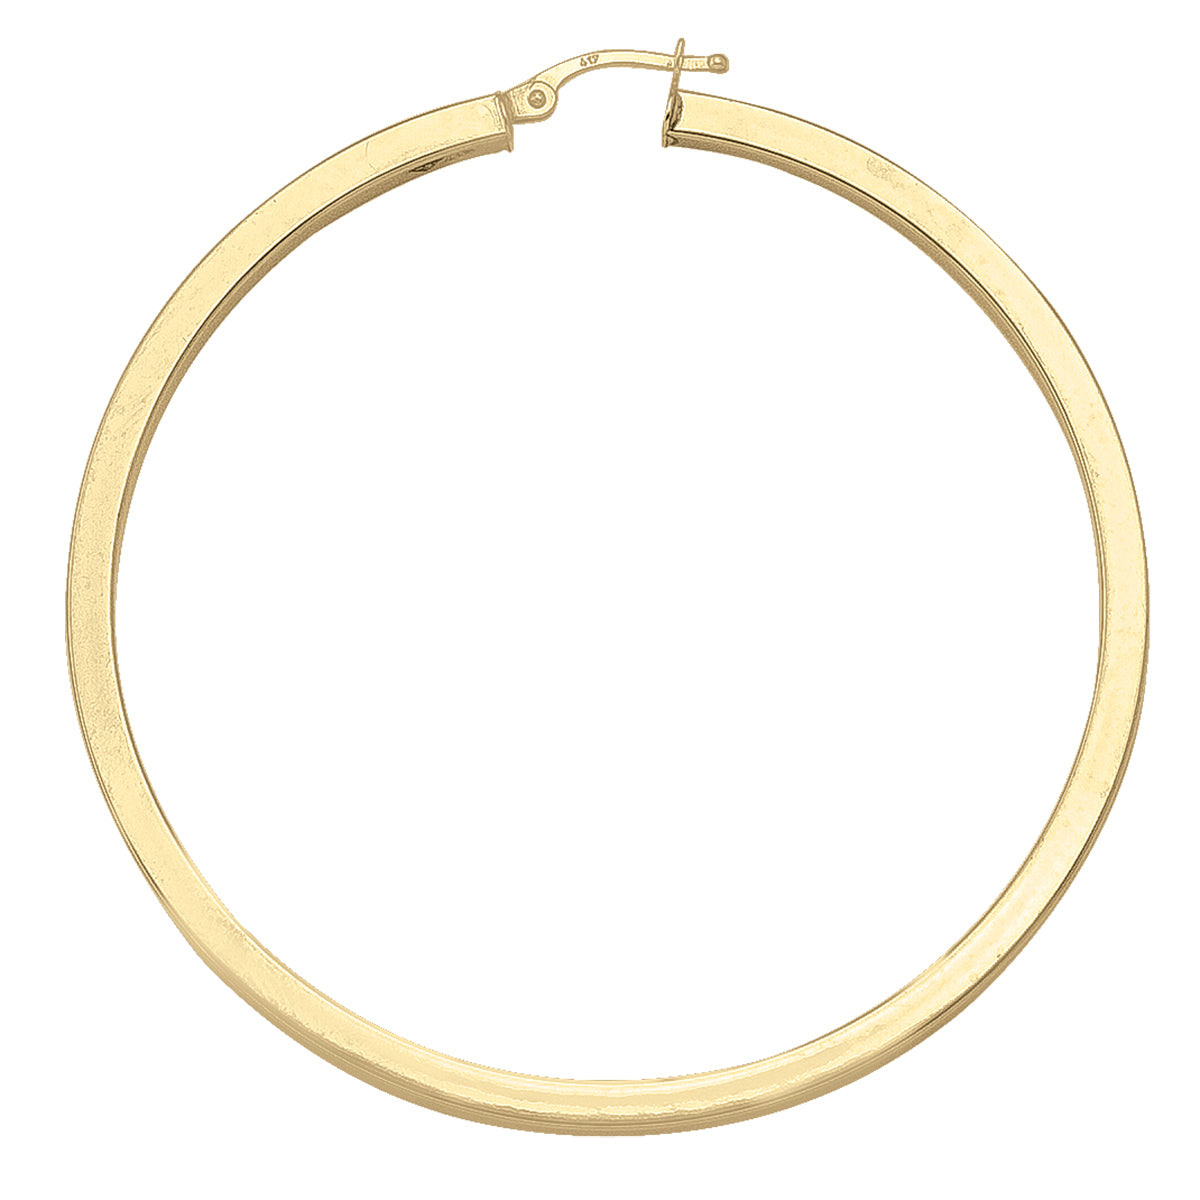 YELLOW GOLD SQUARE 2.5 MM TUBE HOOP EARRING